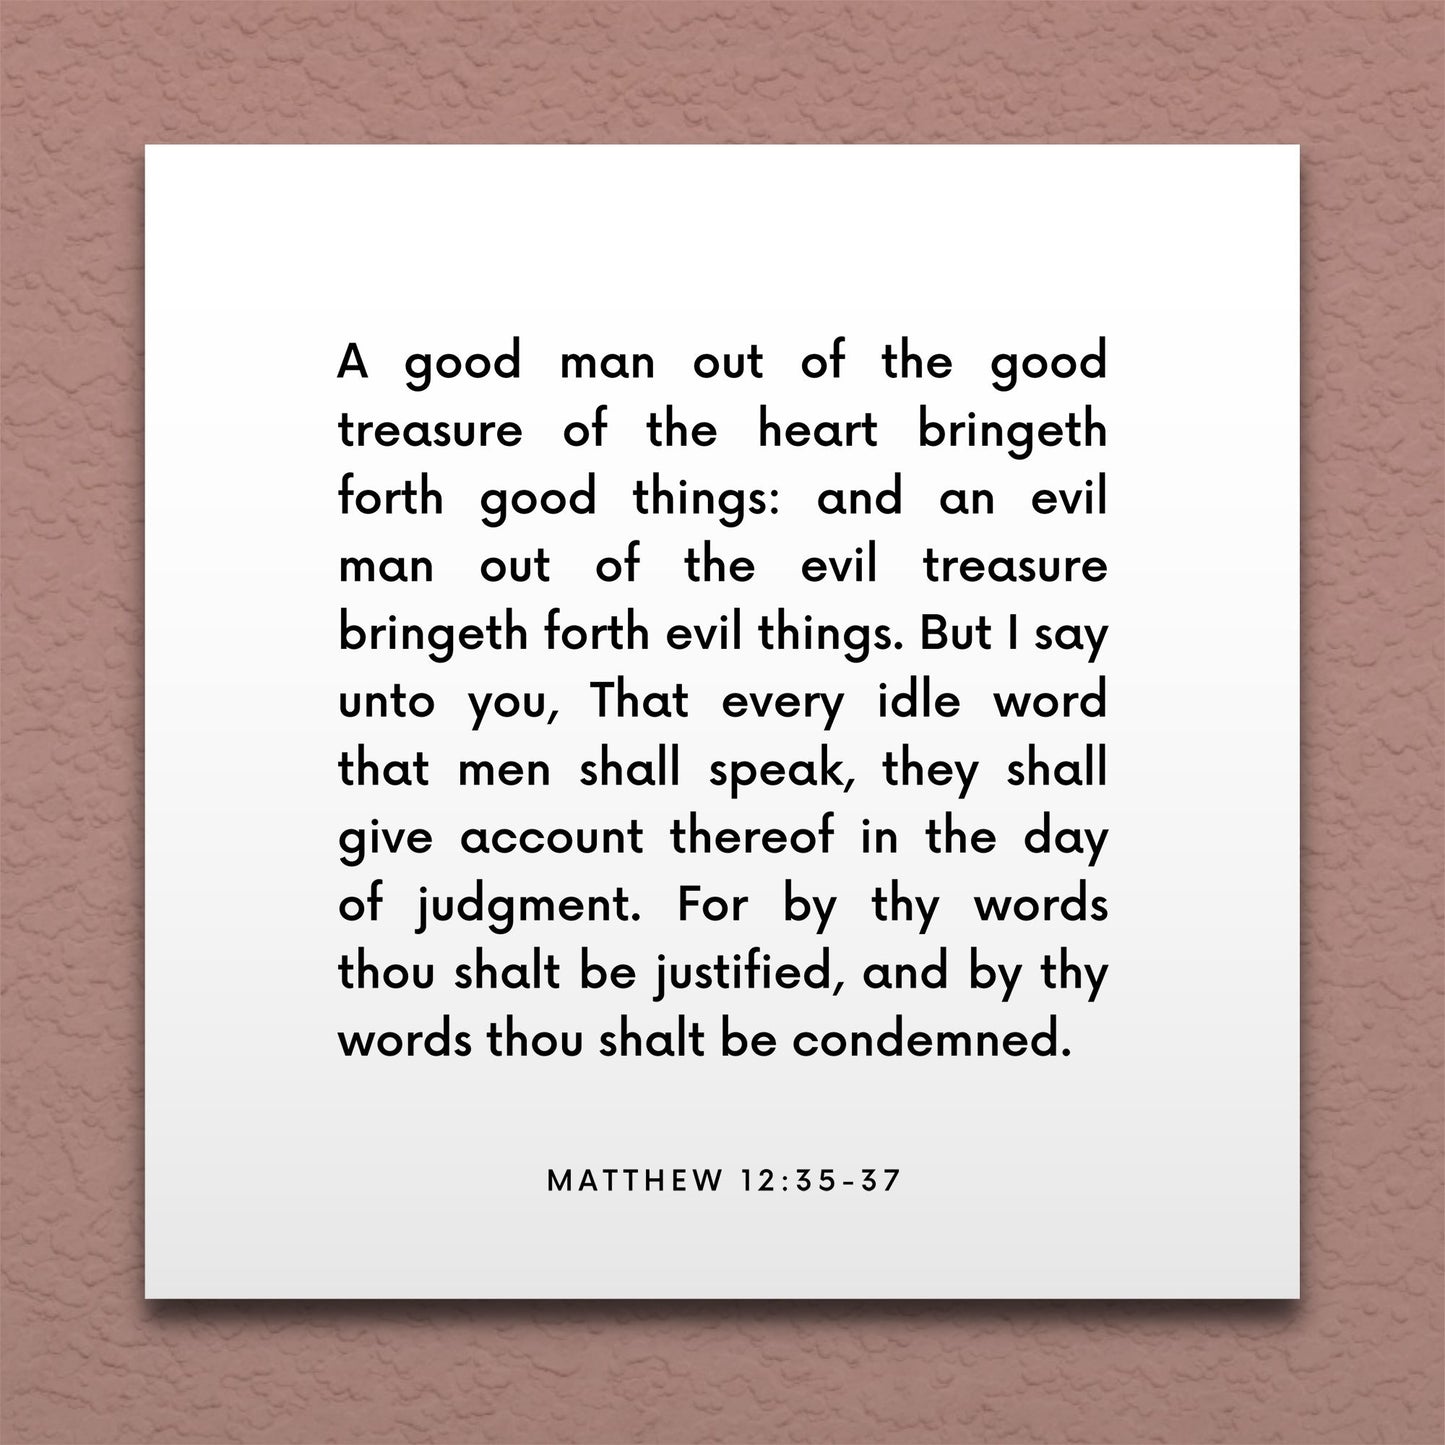 Wall-mounted scripture tile for Matthew 12:35-37 - "By thy words thou shalt be justified"